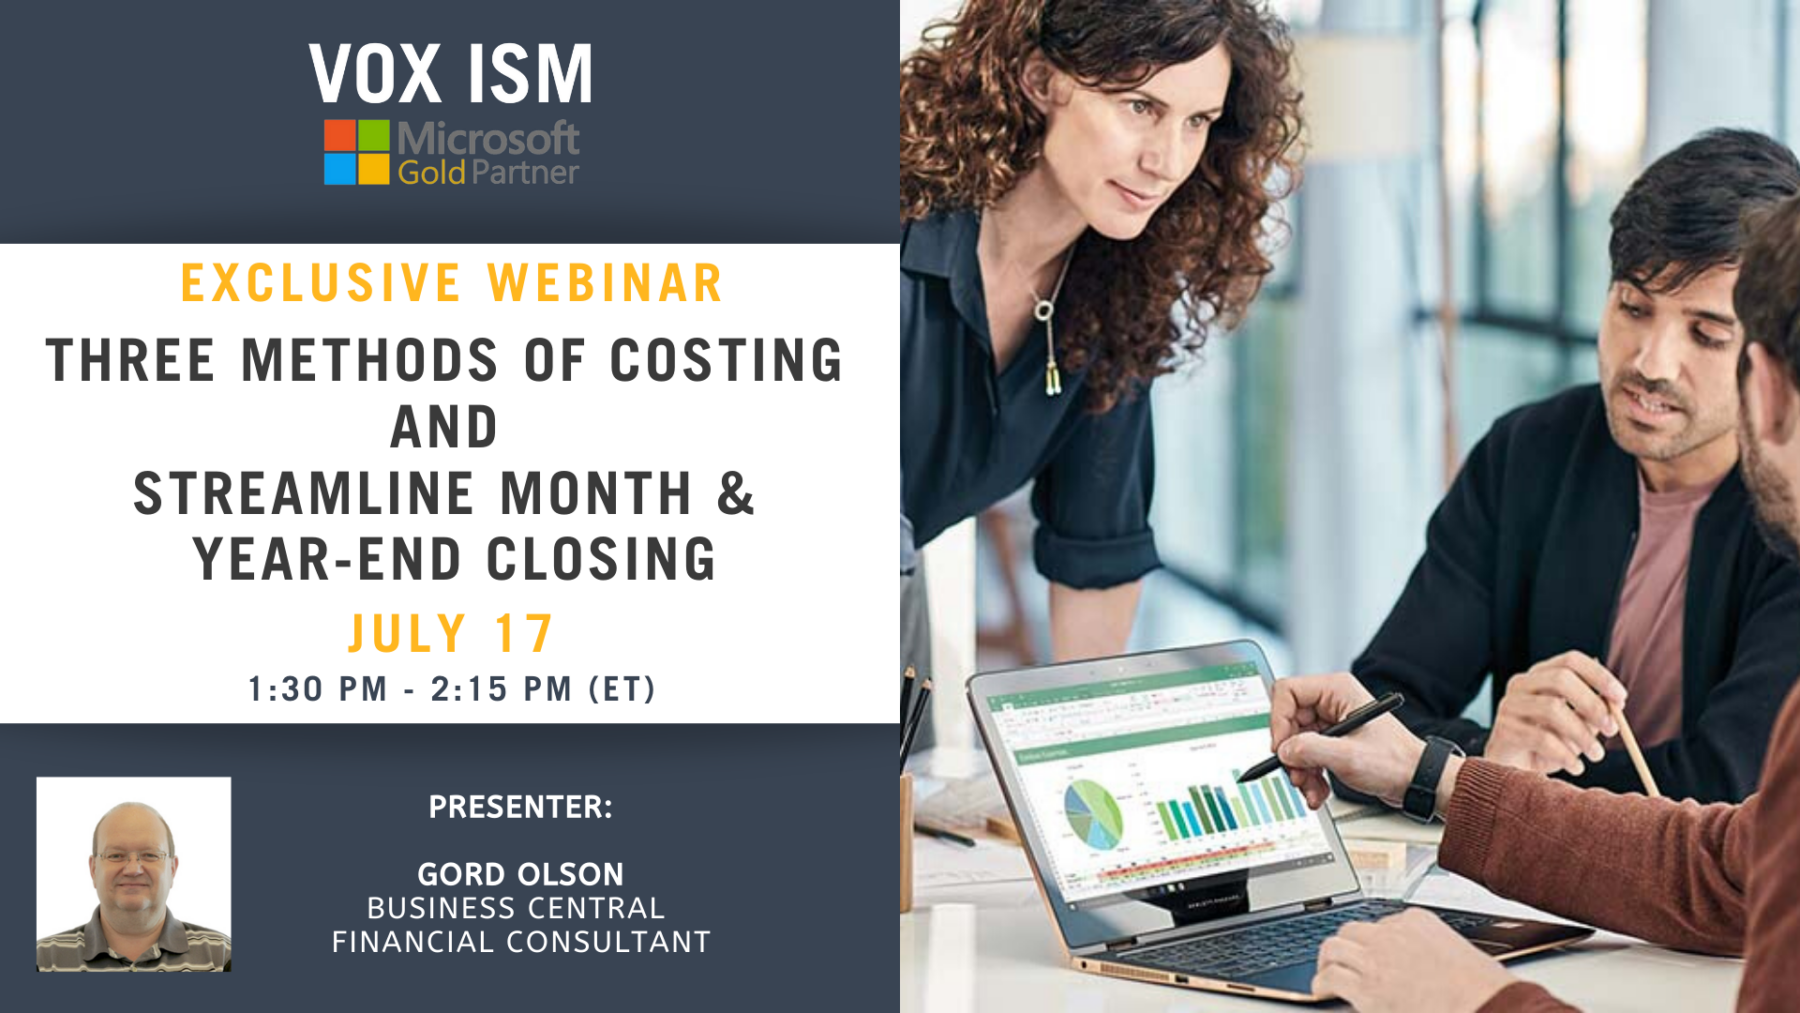 Three methods of costing and streamline month & year-end closing - July 17 - Webinar VOX ISM